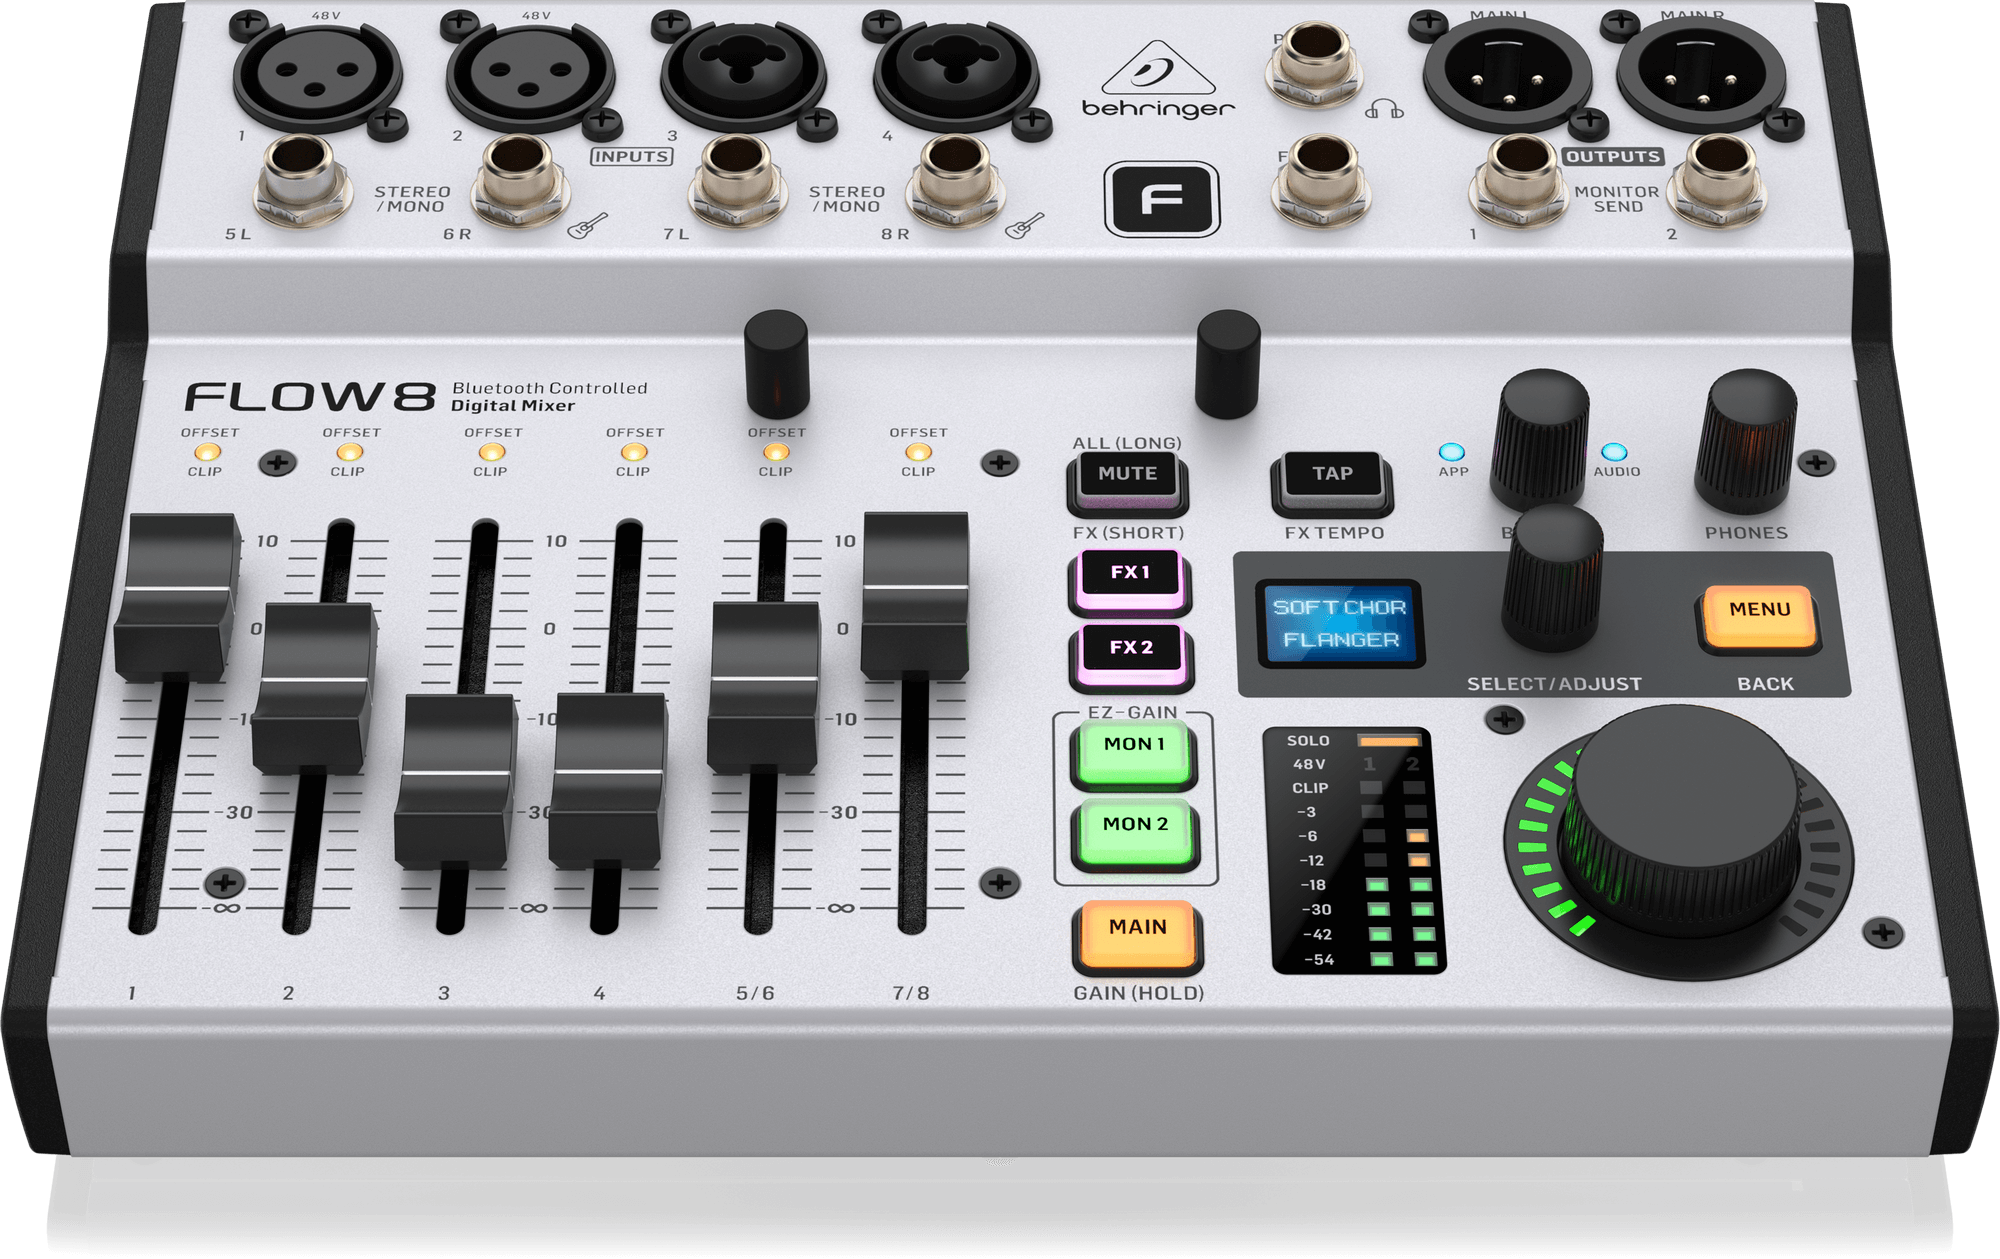 Ideal for Small Clubs or Bars LZSIG Ultra Low-Noise 4-Channel Line Mixer for Sub-Mixing Bass Comes with adapter 4-Stereo Mini Audio Mixer Keyboards -LMIX1 As Electronic drum,Guitars 